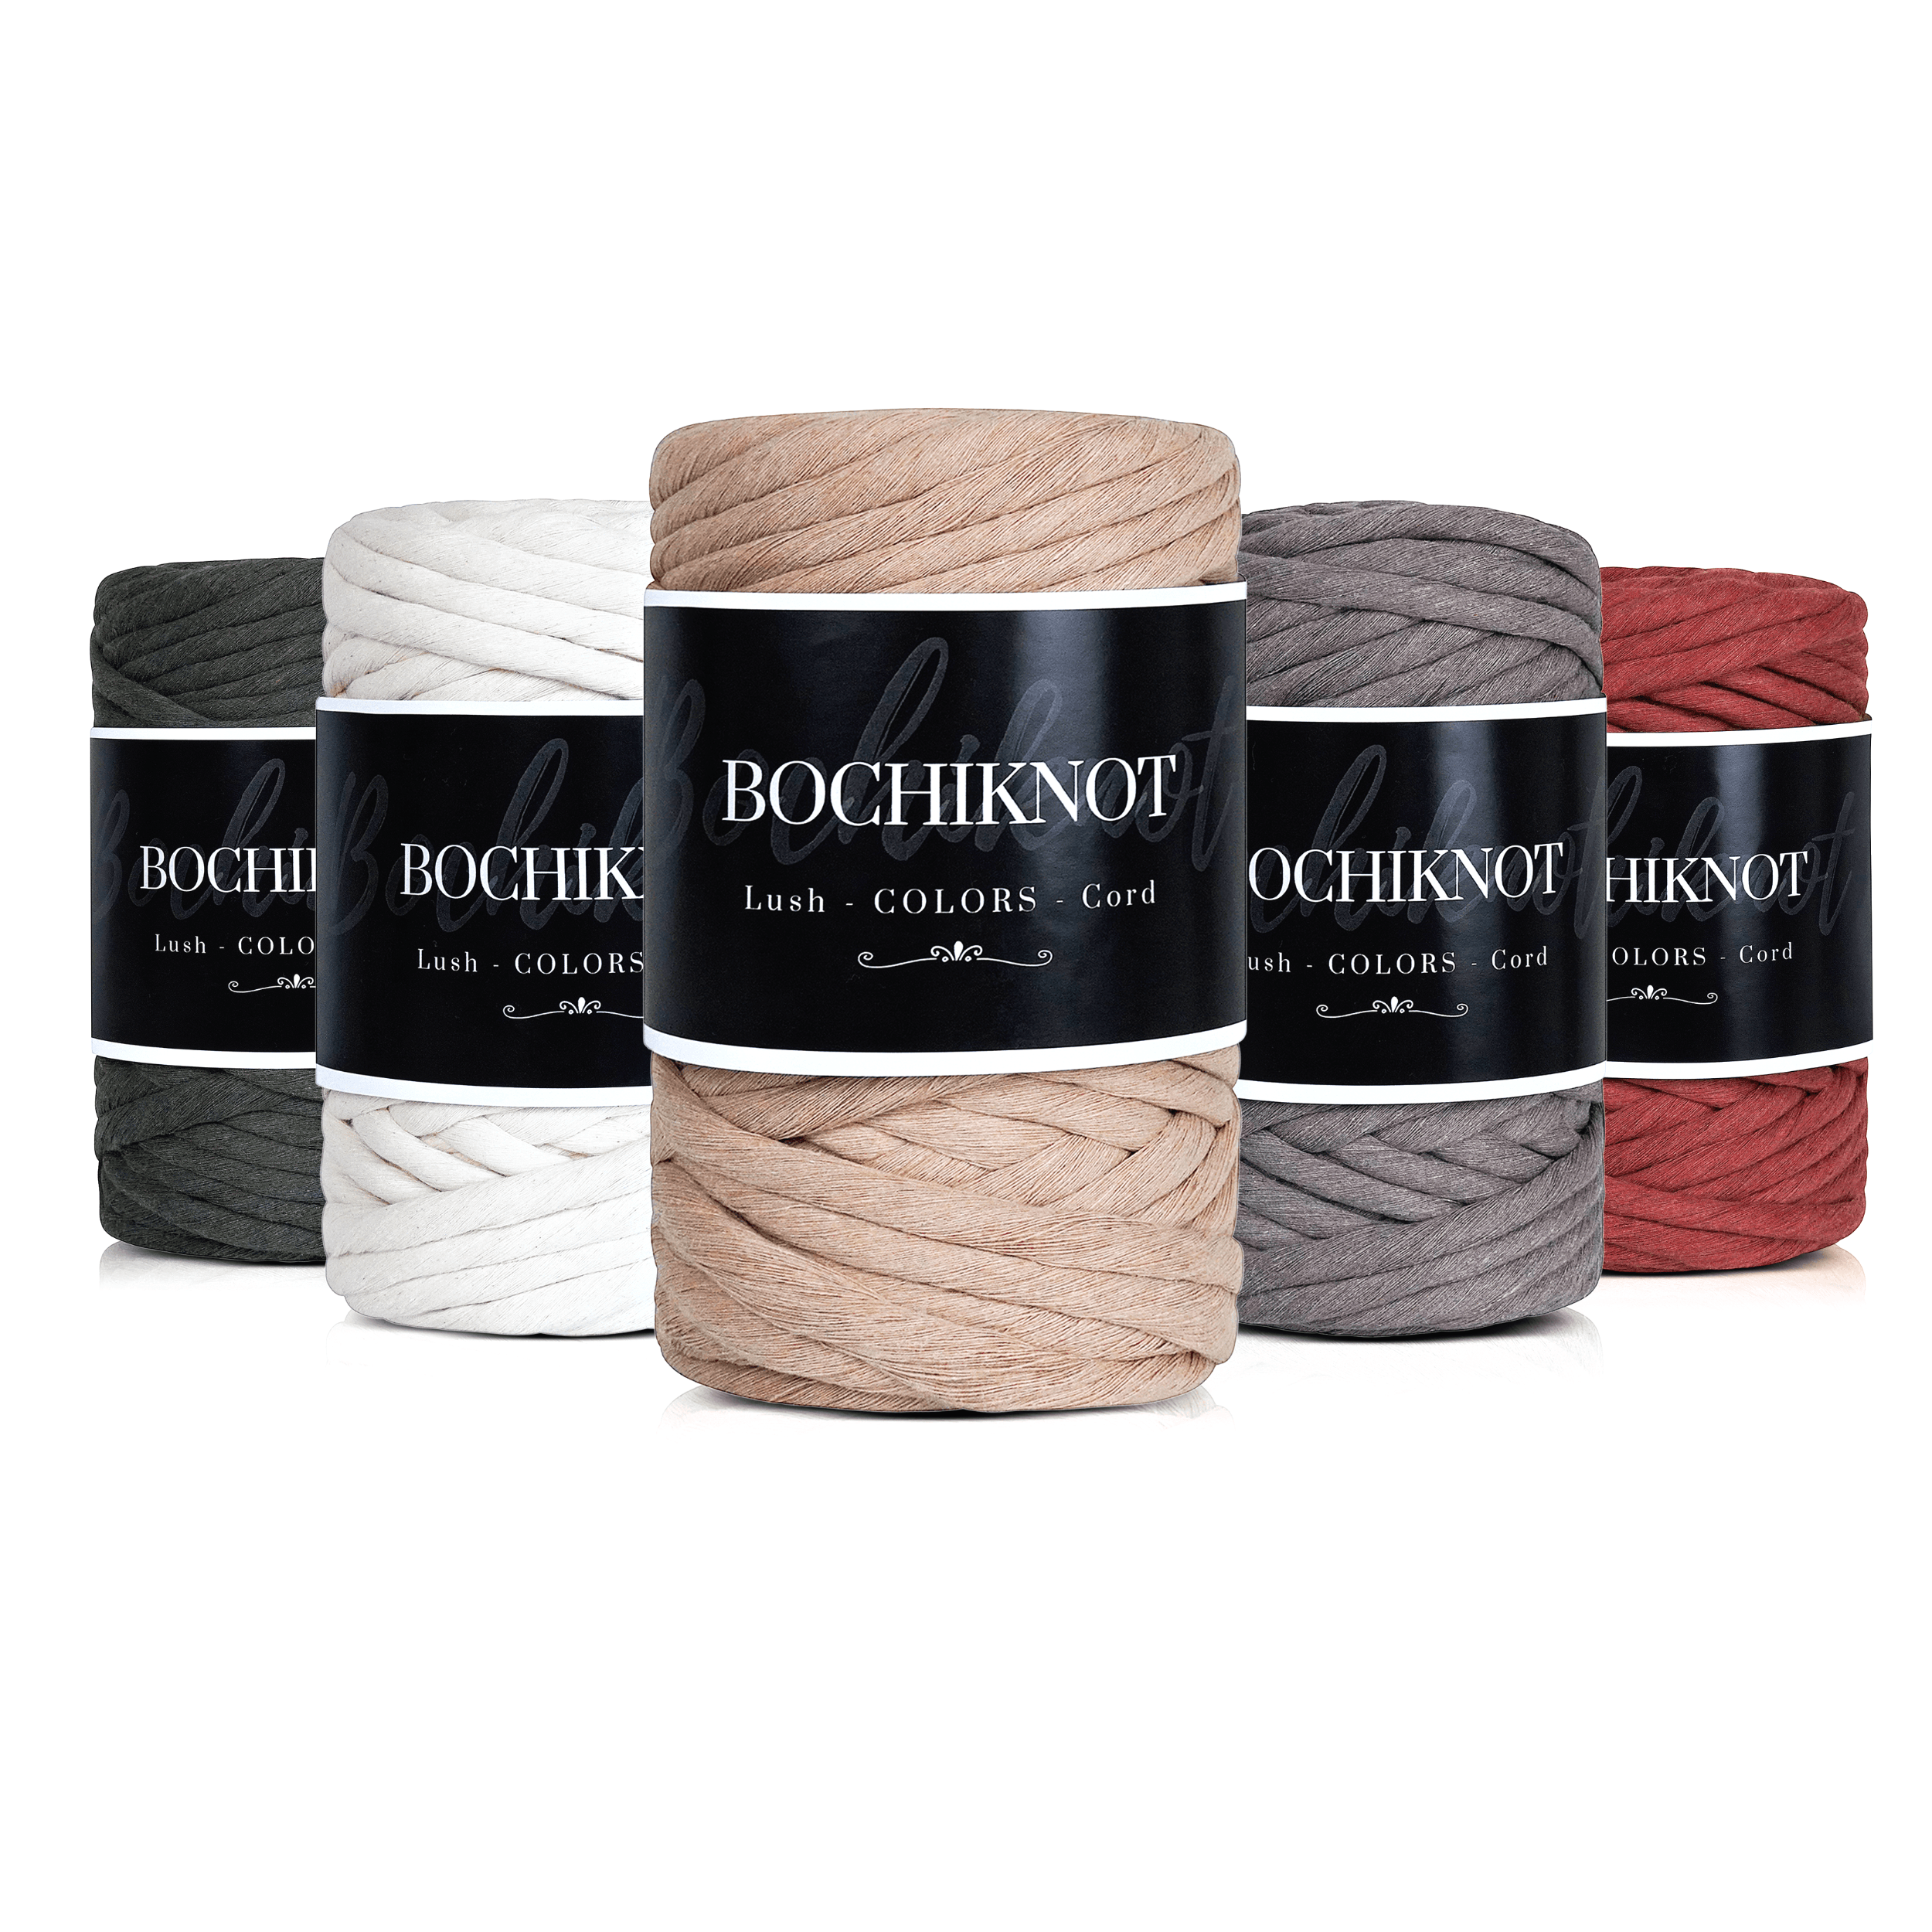  BOCHIKNOT 5mm Macrame Cord - Single Strand Macrame Cord -  Cotton Cord For Macrame & Knotting - Macrame Rope Supplies In 3mm 4mm 5mm  For Crafts, Wall Hangings, Plant Hangers